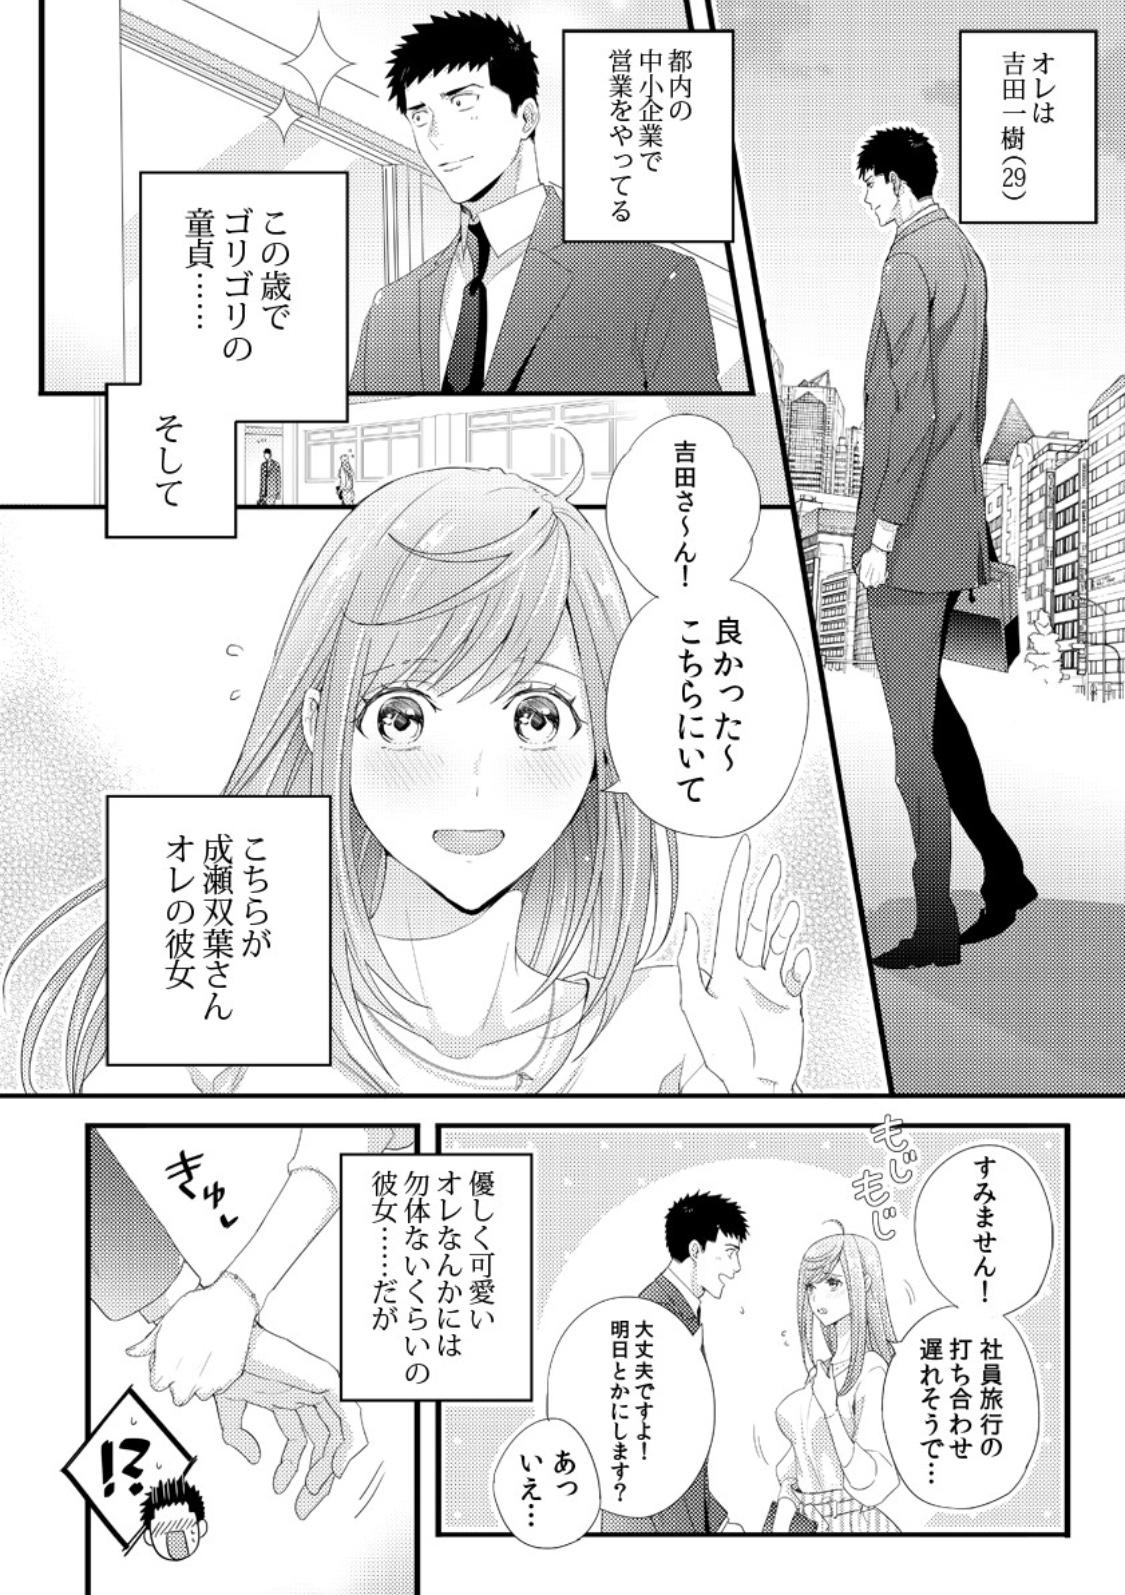 Please Let Me Hold You Futaba-San! Ch. 1-4 1